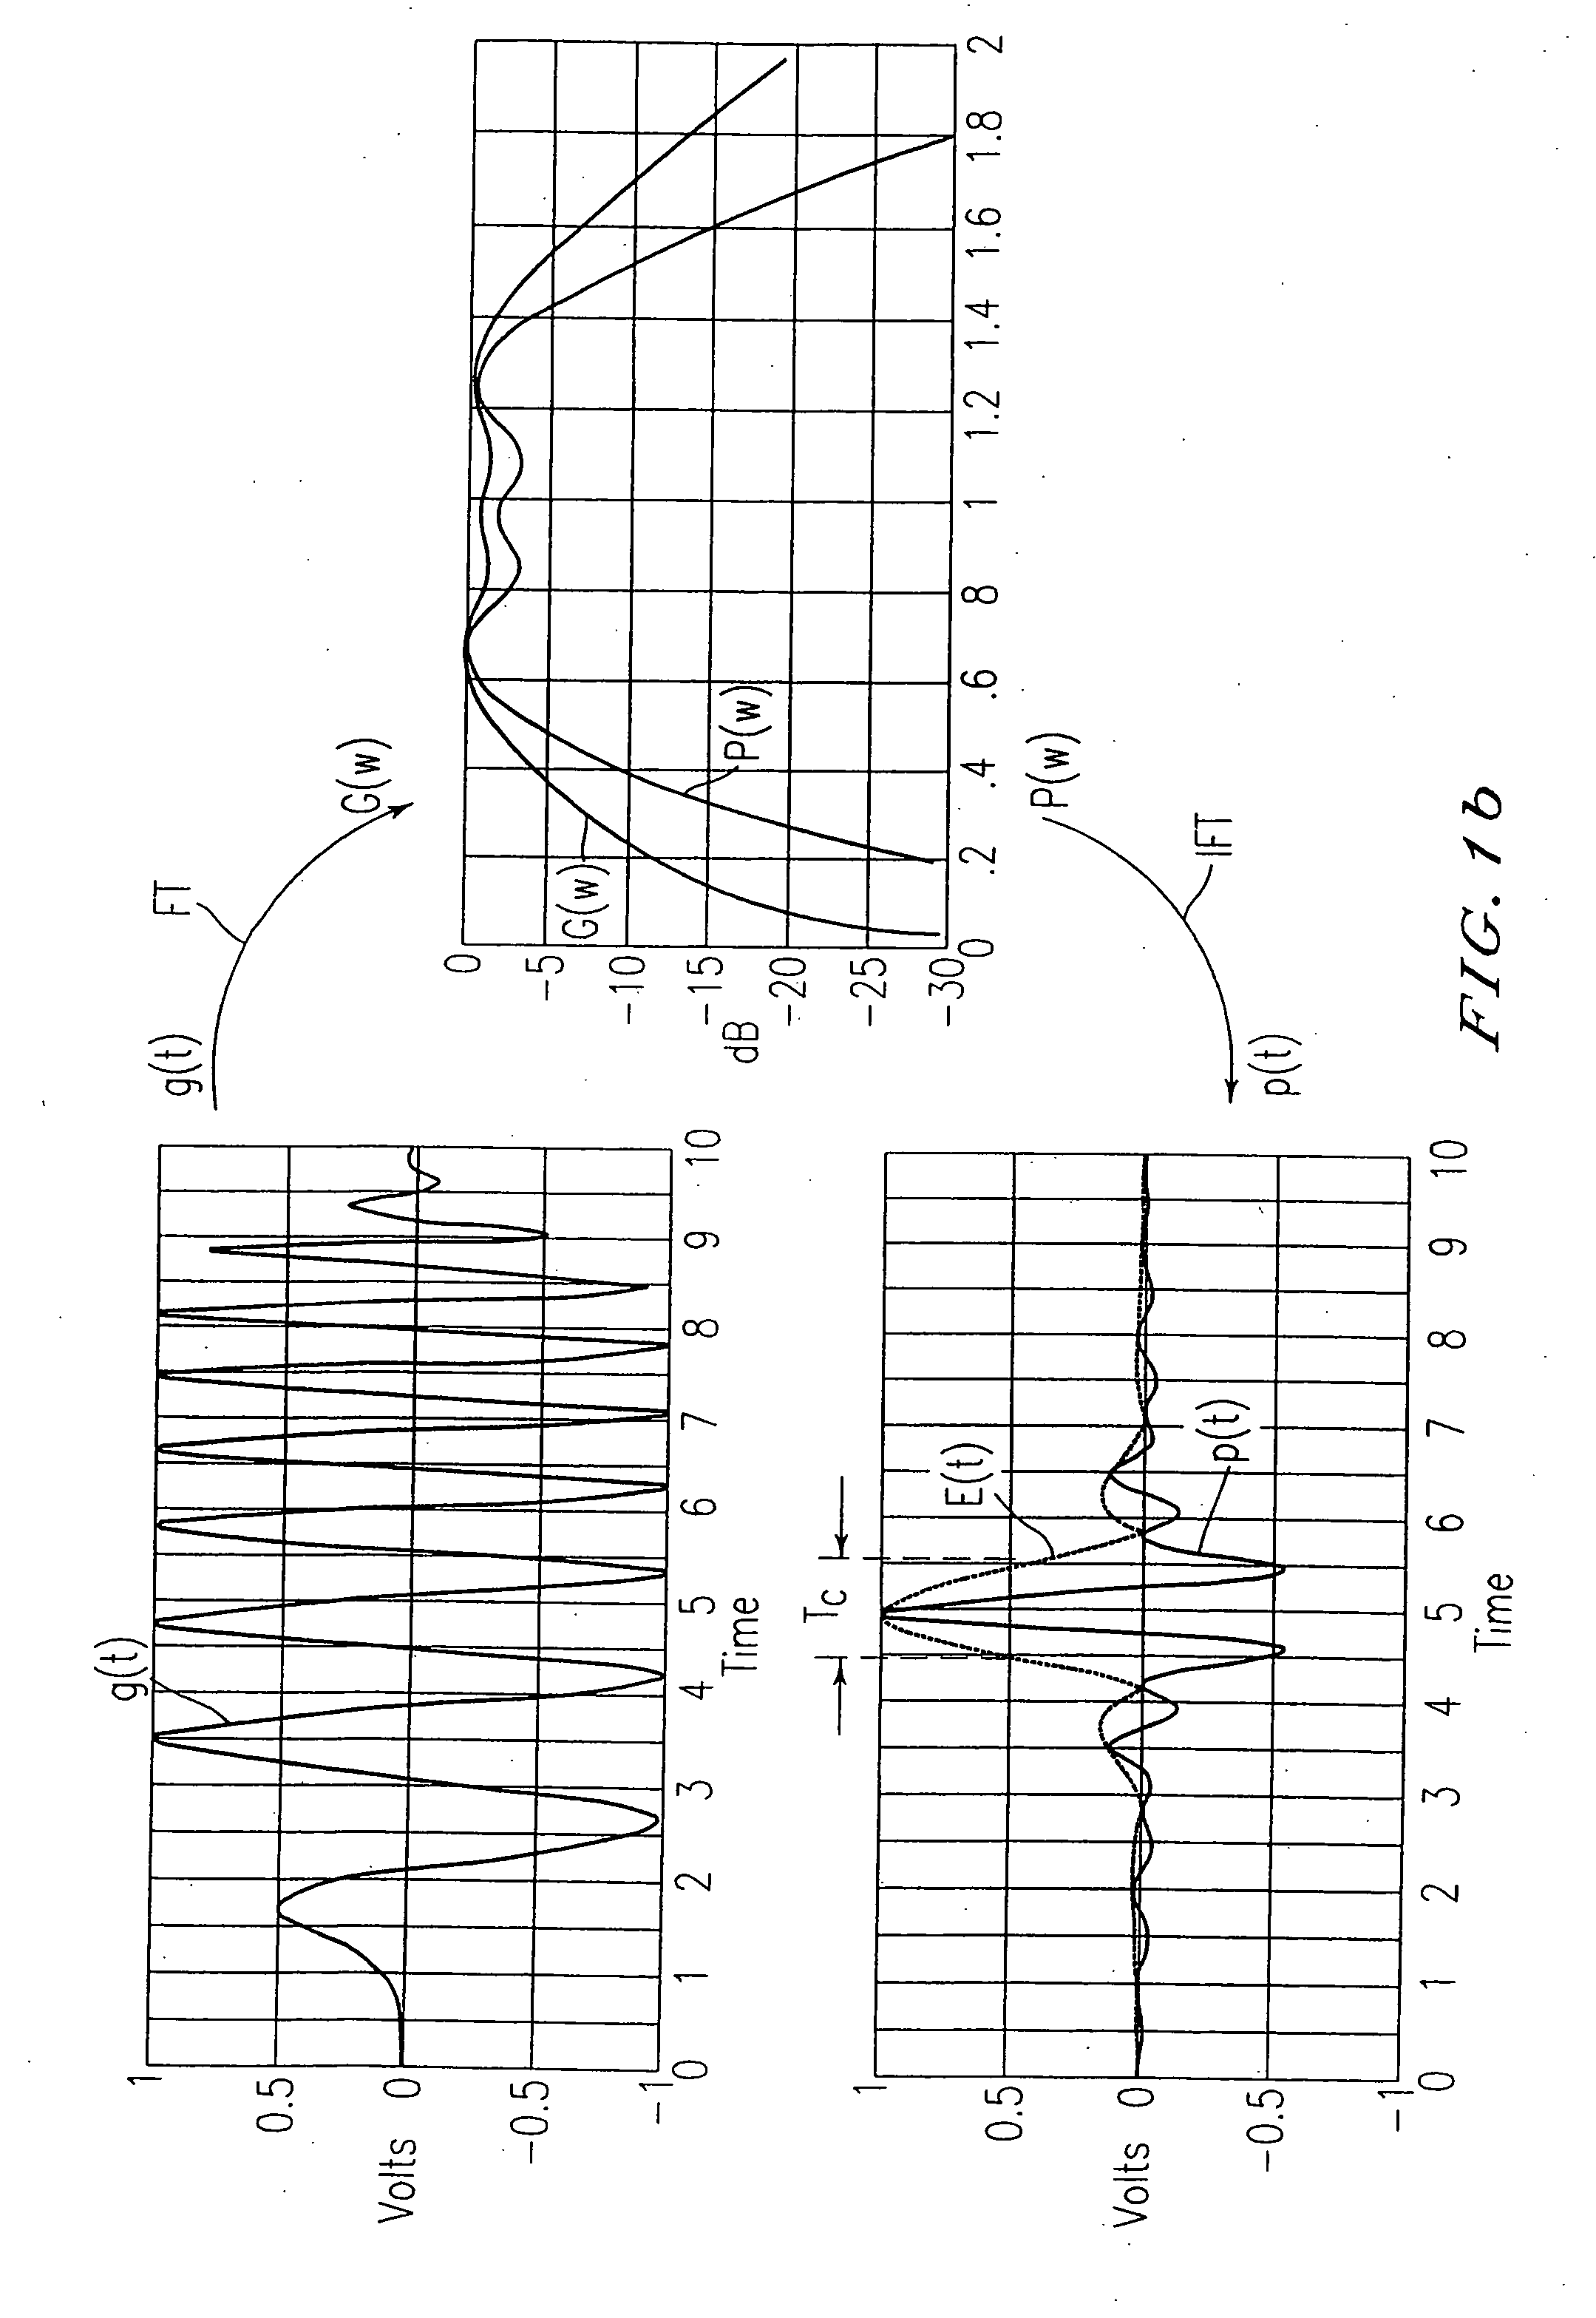 System and method for generating shaped ultrawide bandwidth wavelets